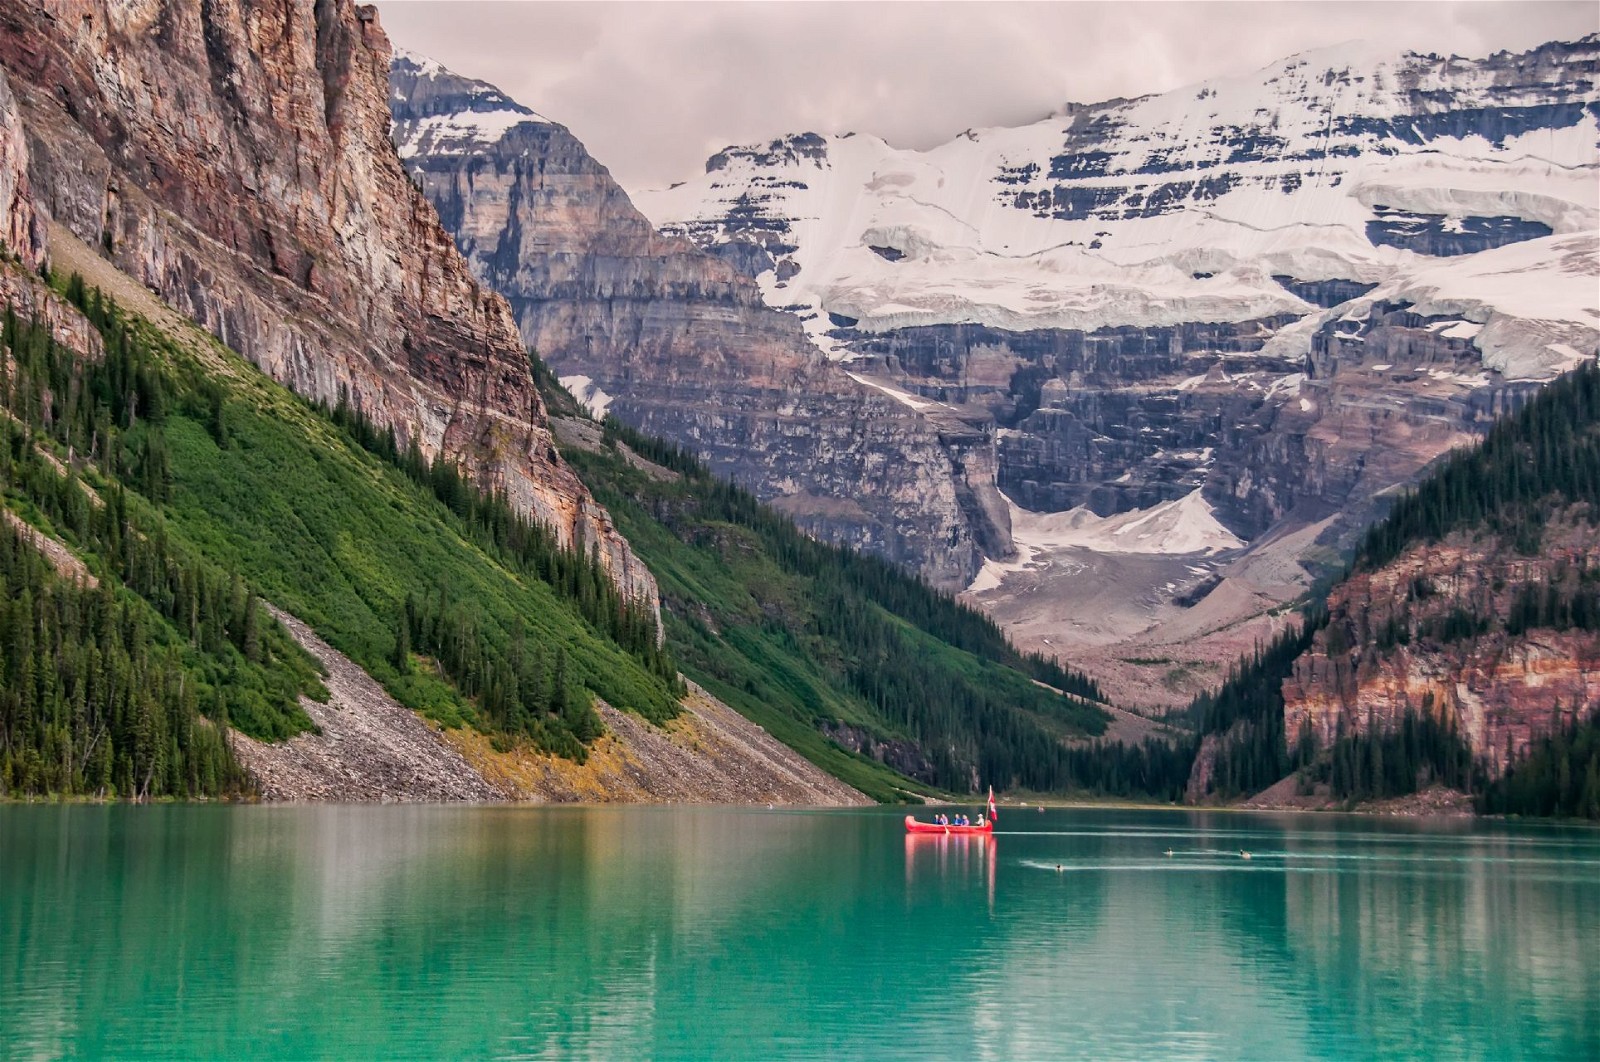 While the train journey itself is the highlight of many visitors' trips to Banff, there's plenty to see and do in the town and surrounding area as well. Some popular activities include: